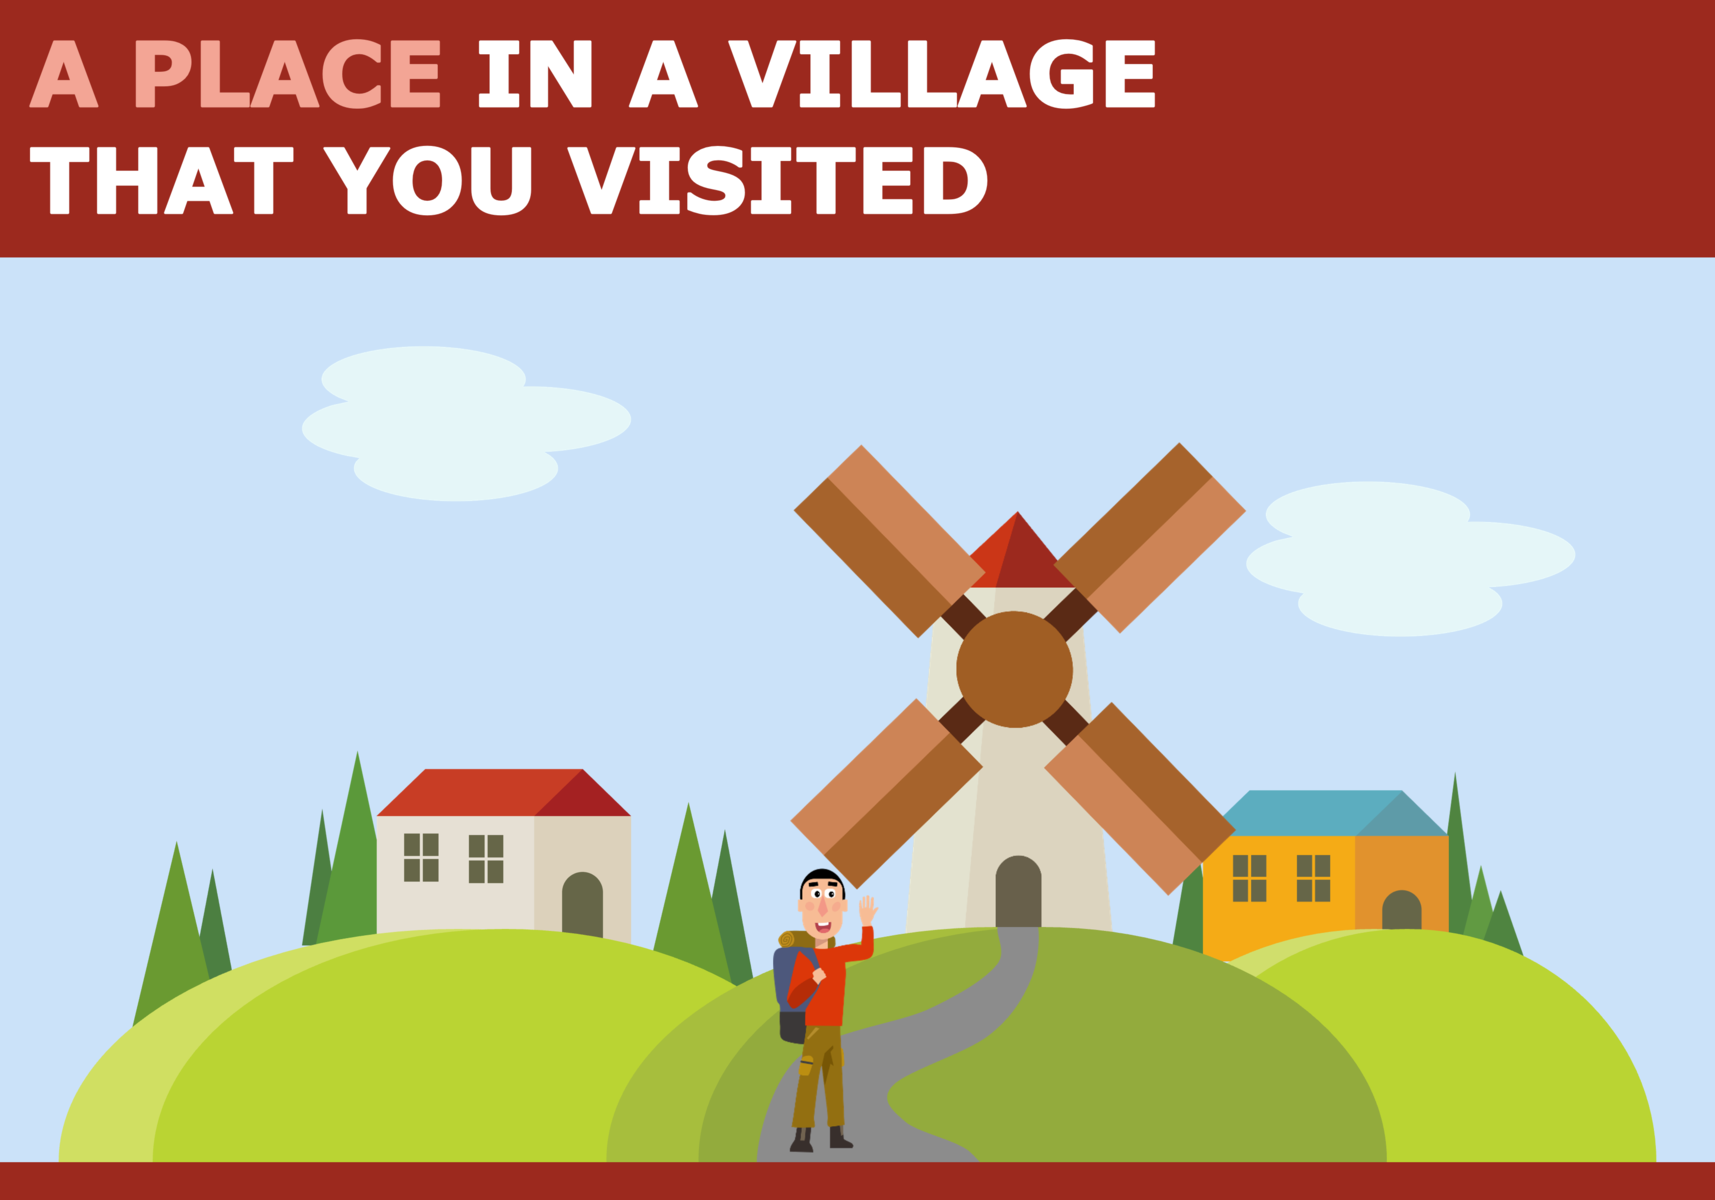 IELTS Speaking Part 3 Sample Describe A Place In A Village You Visited